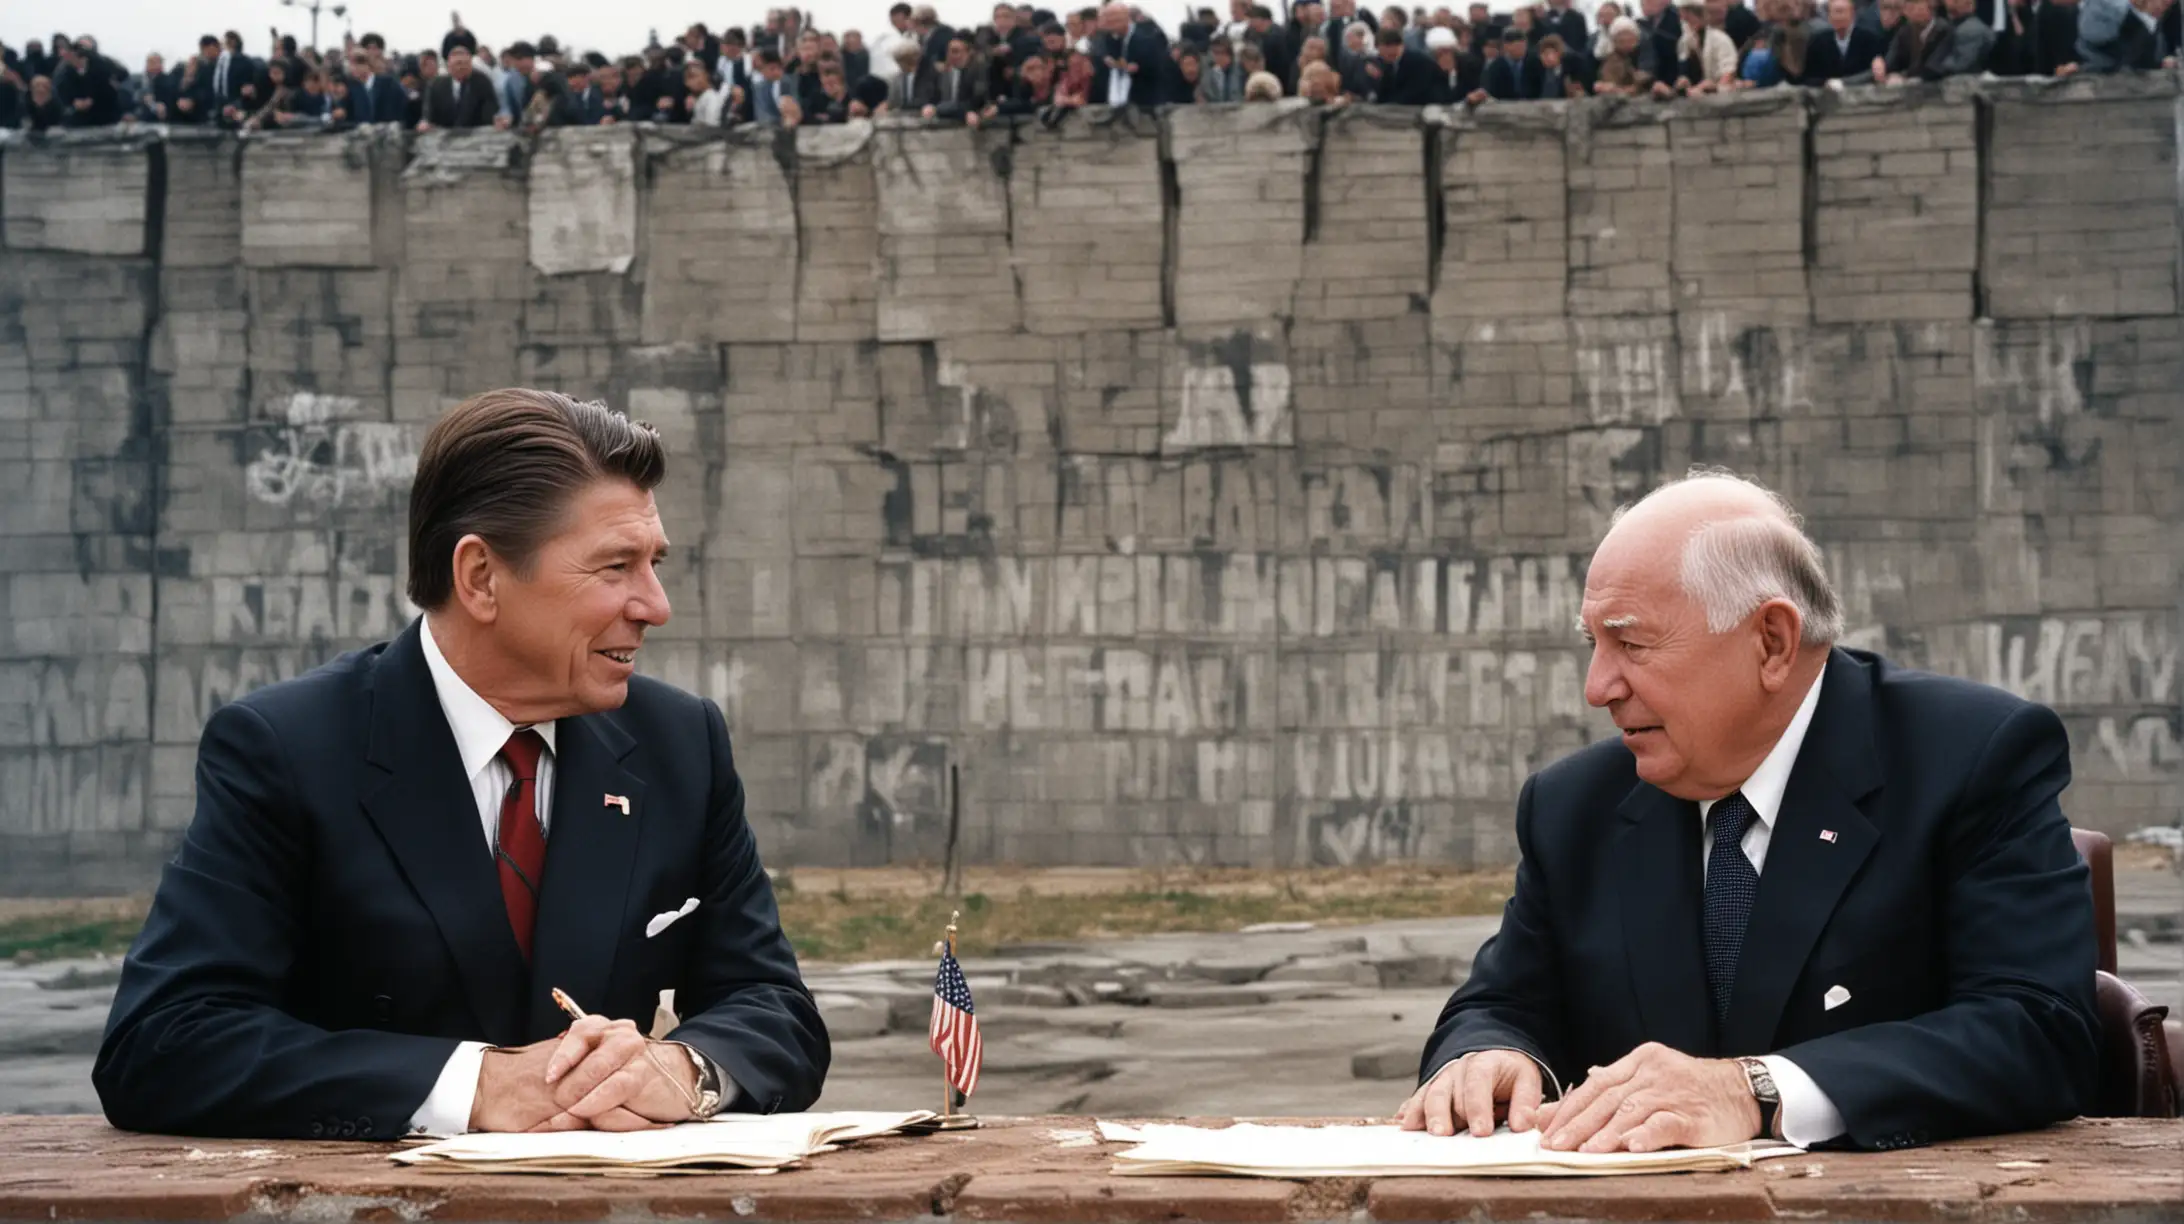 n: A powerful image of Ronald Reagan and Mikhail Gorbachev  at the signing of a nuclear disarmament treaty, with the crumbling Berlin Wall in the background, symbolizing Reagan's role in ending the Cold War and fostering détente with the Soviet Union.